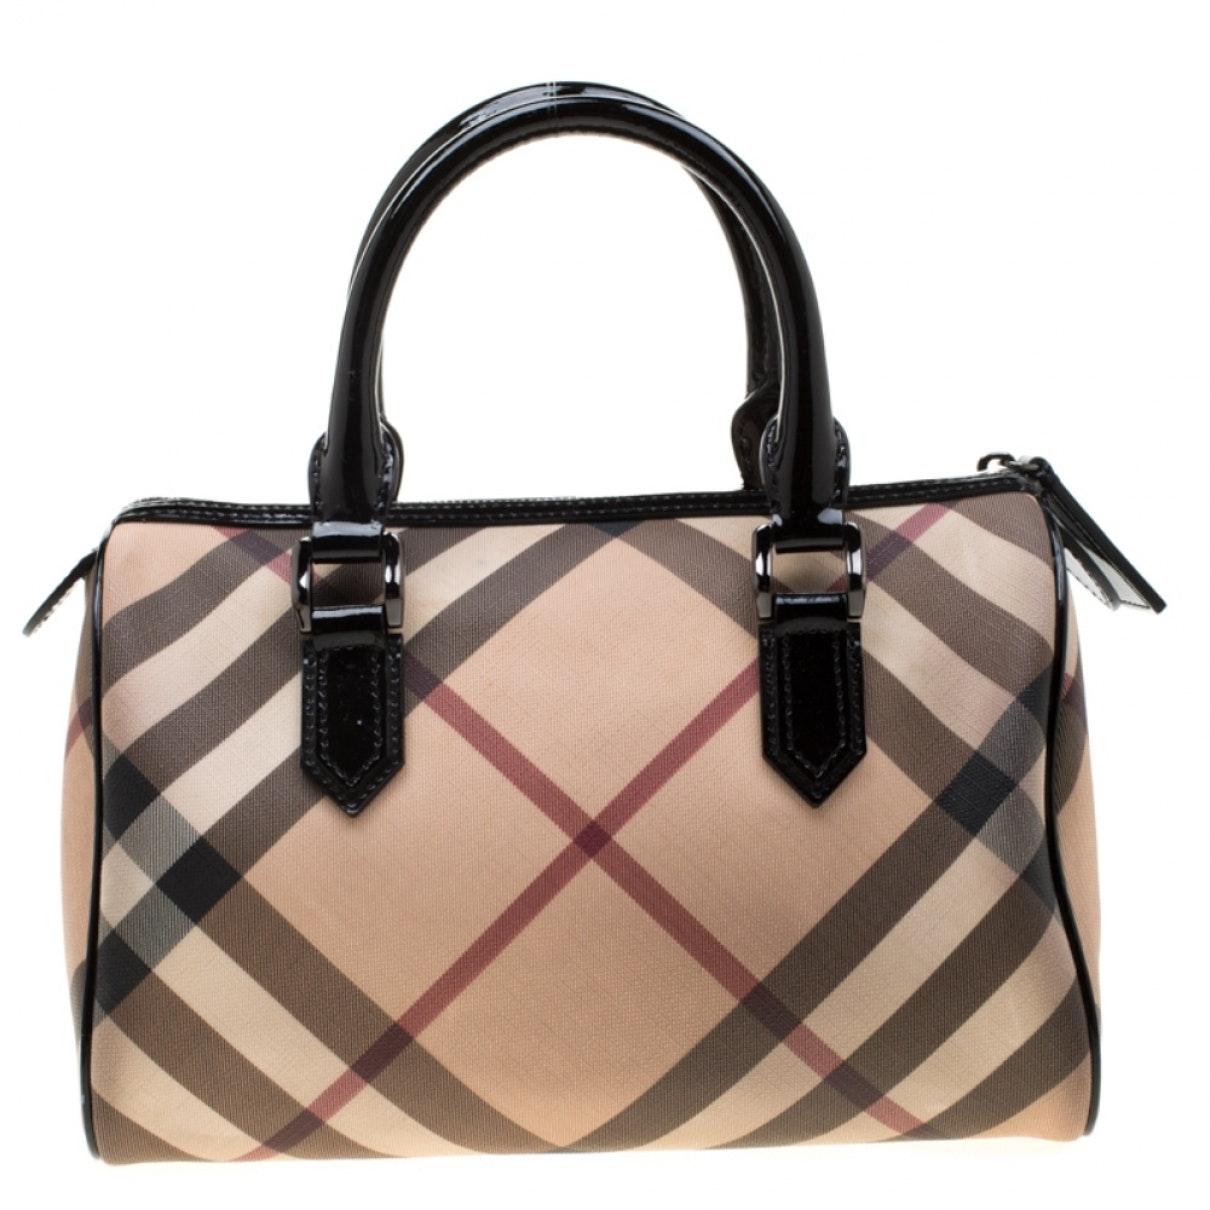 Burberry Beige Patent Leather Handbag in Natural - Lyst